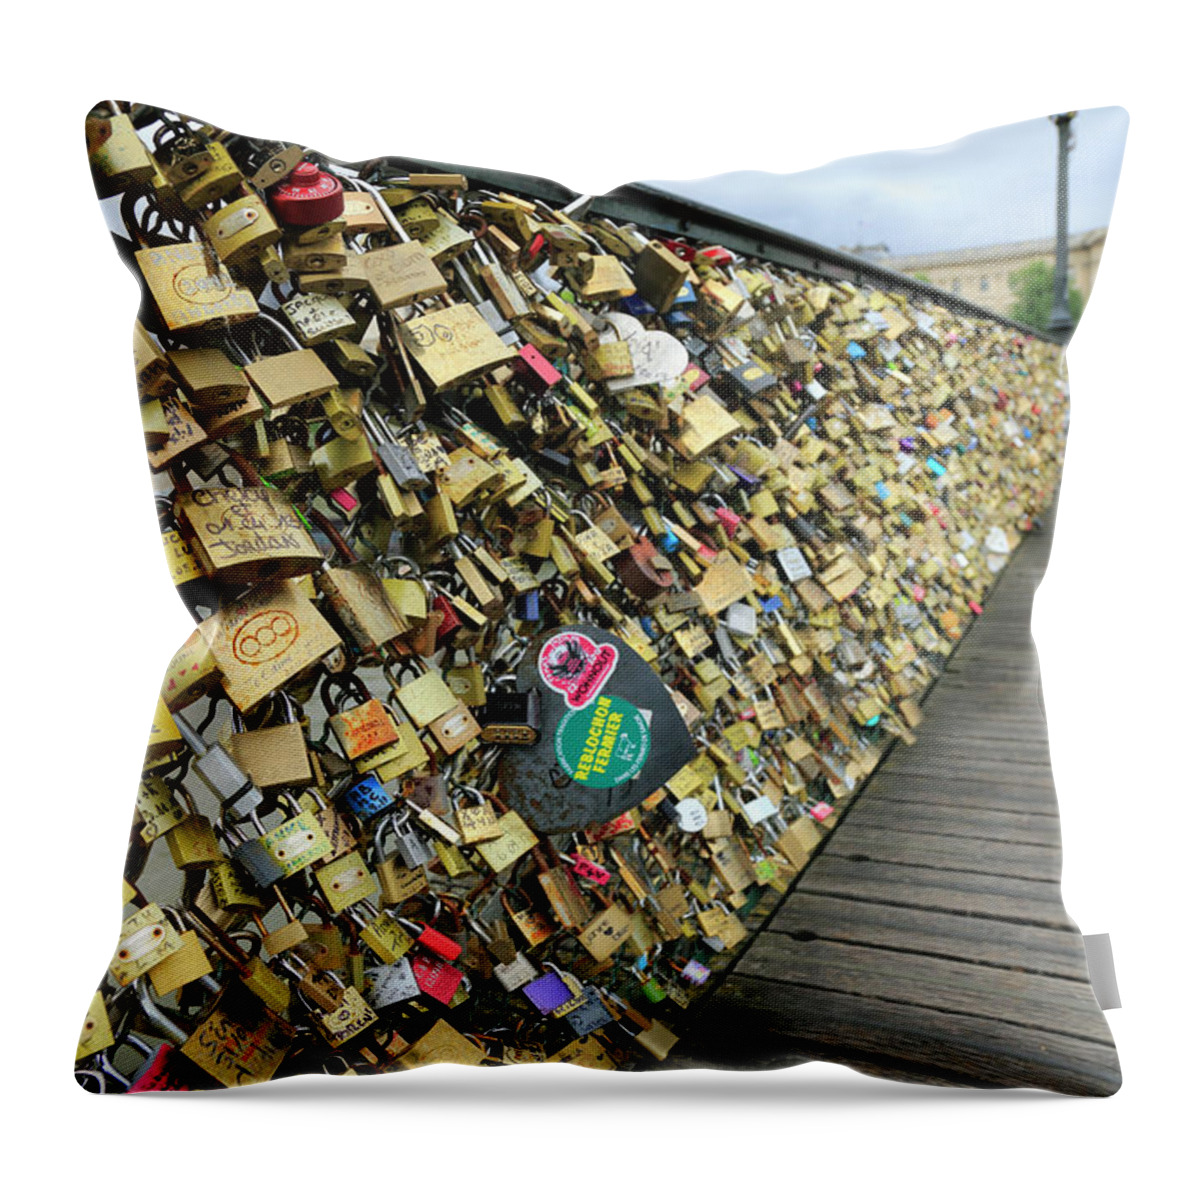 Tranquility Throw Pillow featuring the photograph Love Padlocks On Pont Des Arts Bridge by Bruce Yuanyue Bi